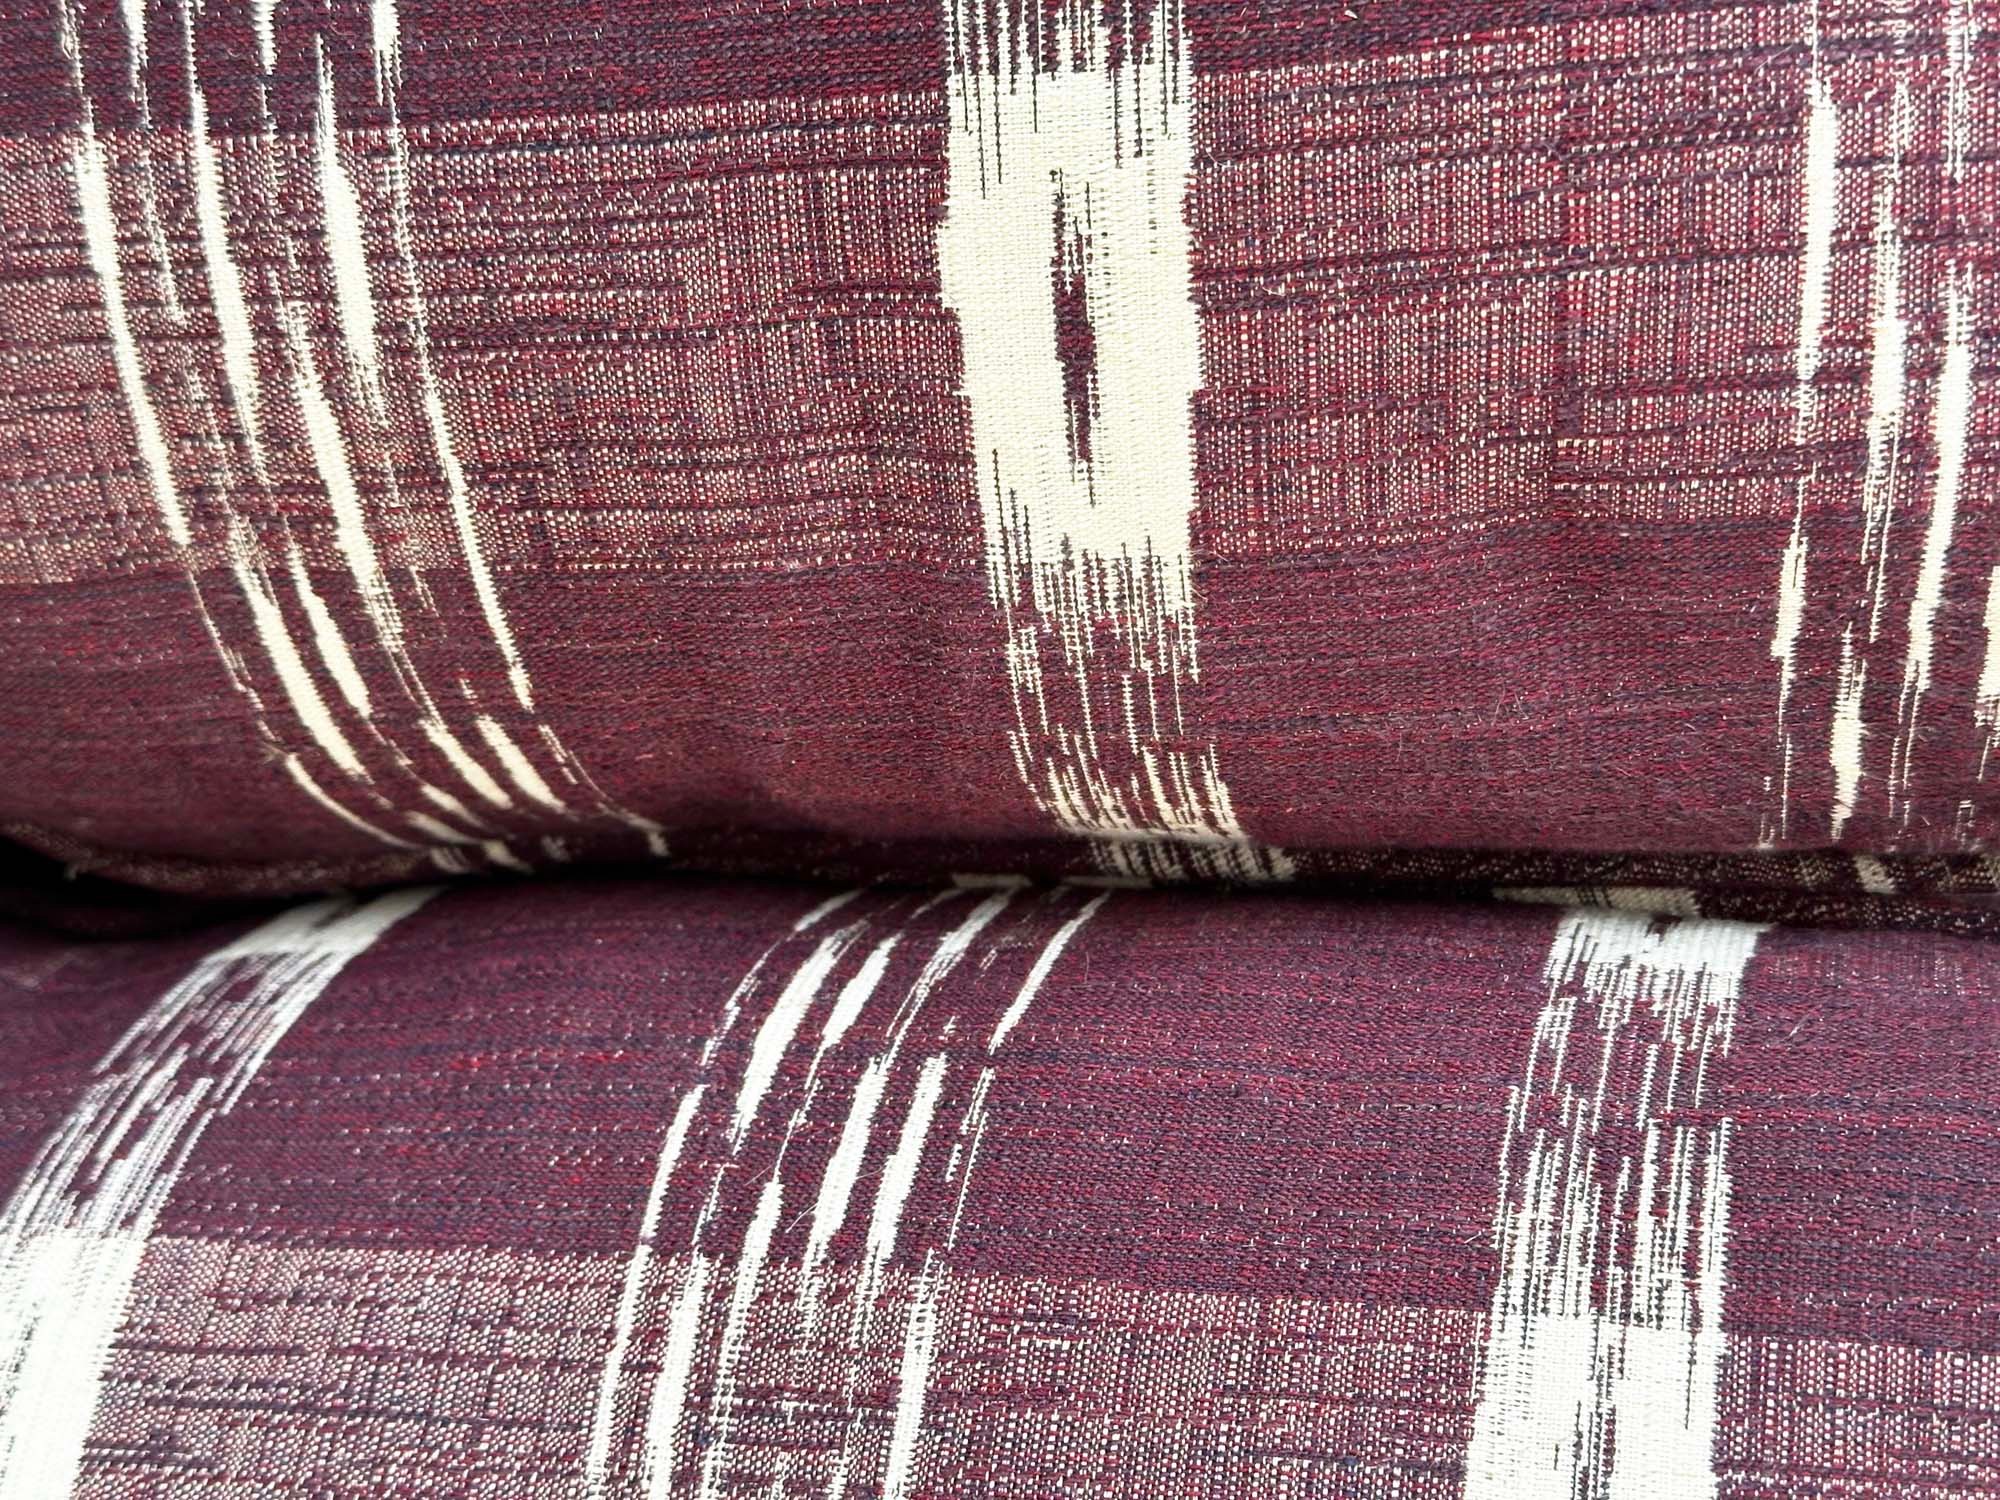 SOFA, Swedish check purple/white upholstery with scroll arms, 203cm W. - Image 4 of 9